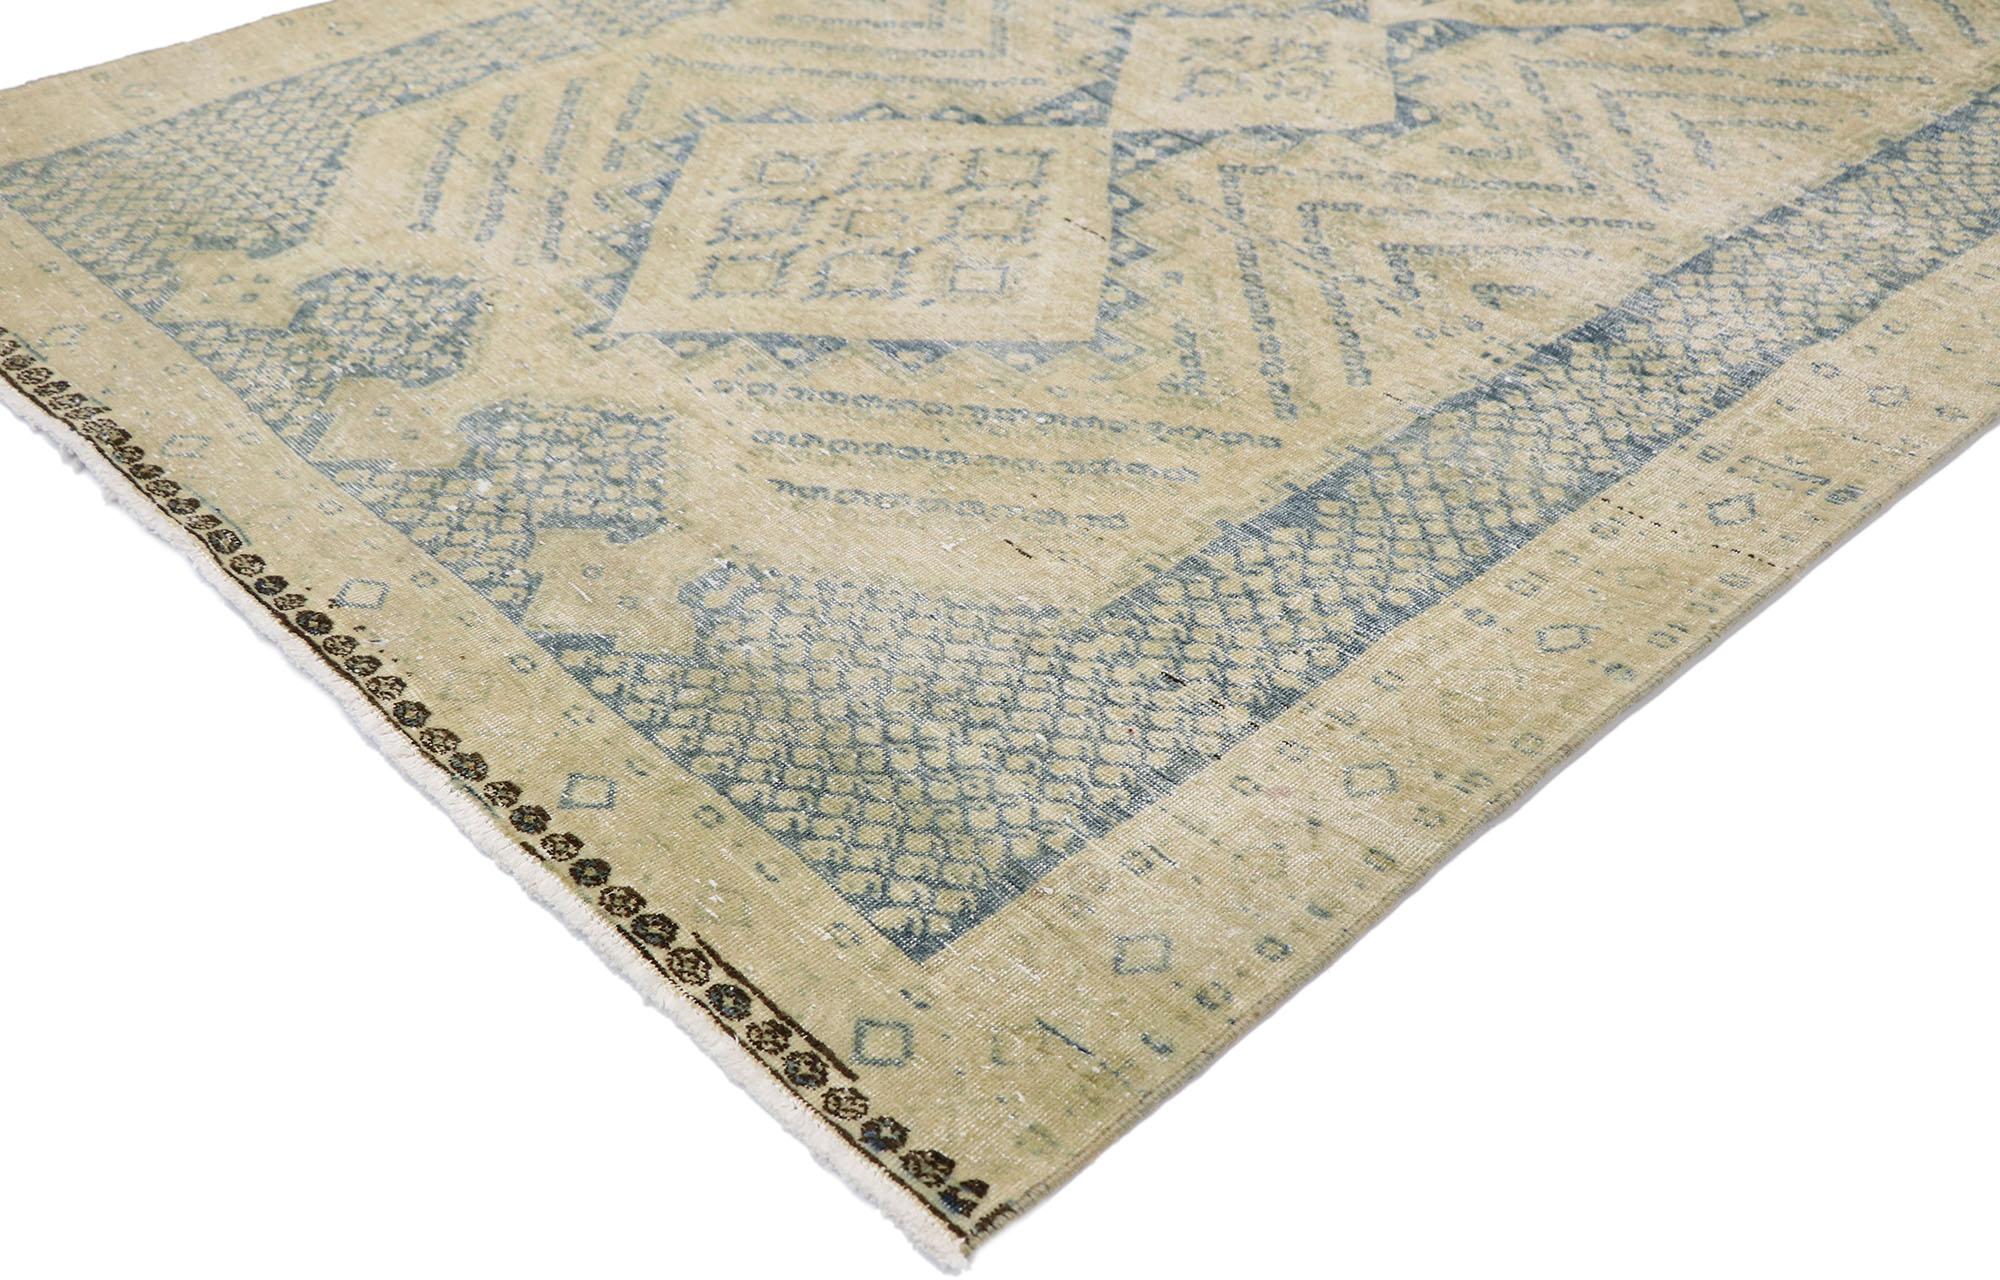 60831, distressed antique Persian Malayer rug with Rustic Coastal style. Balancing rustic sensibility and tribal style with antique washed colors, this hand knotted wool distressed antique Persian Malayer rug can beautifully blend modern,